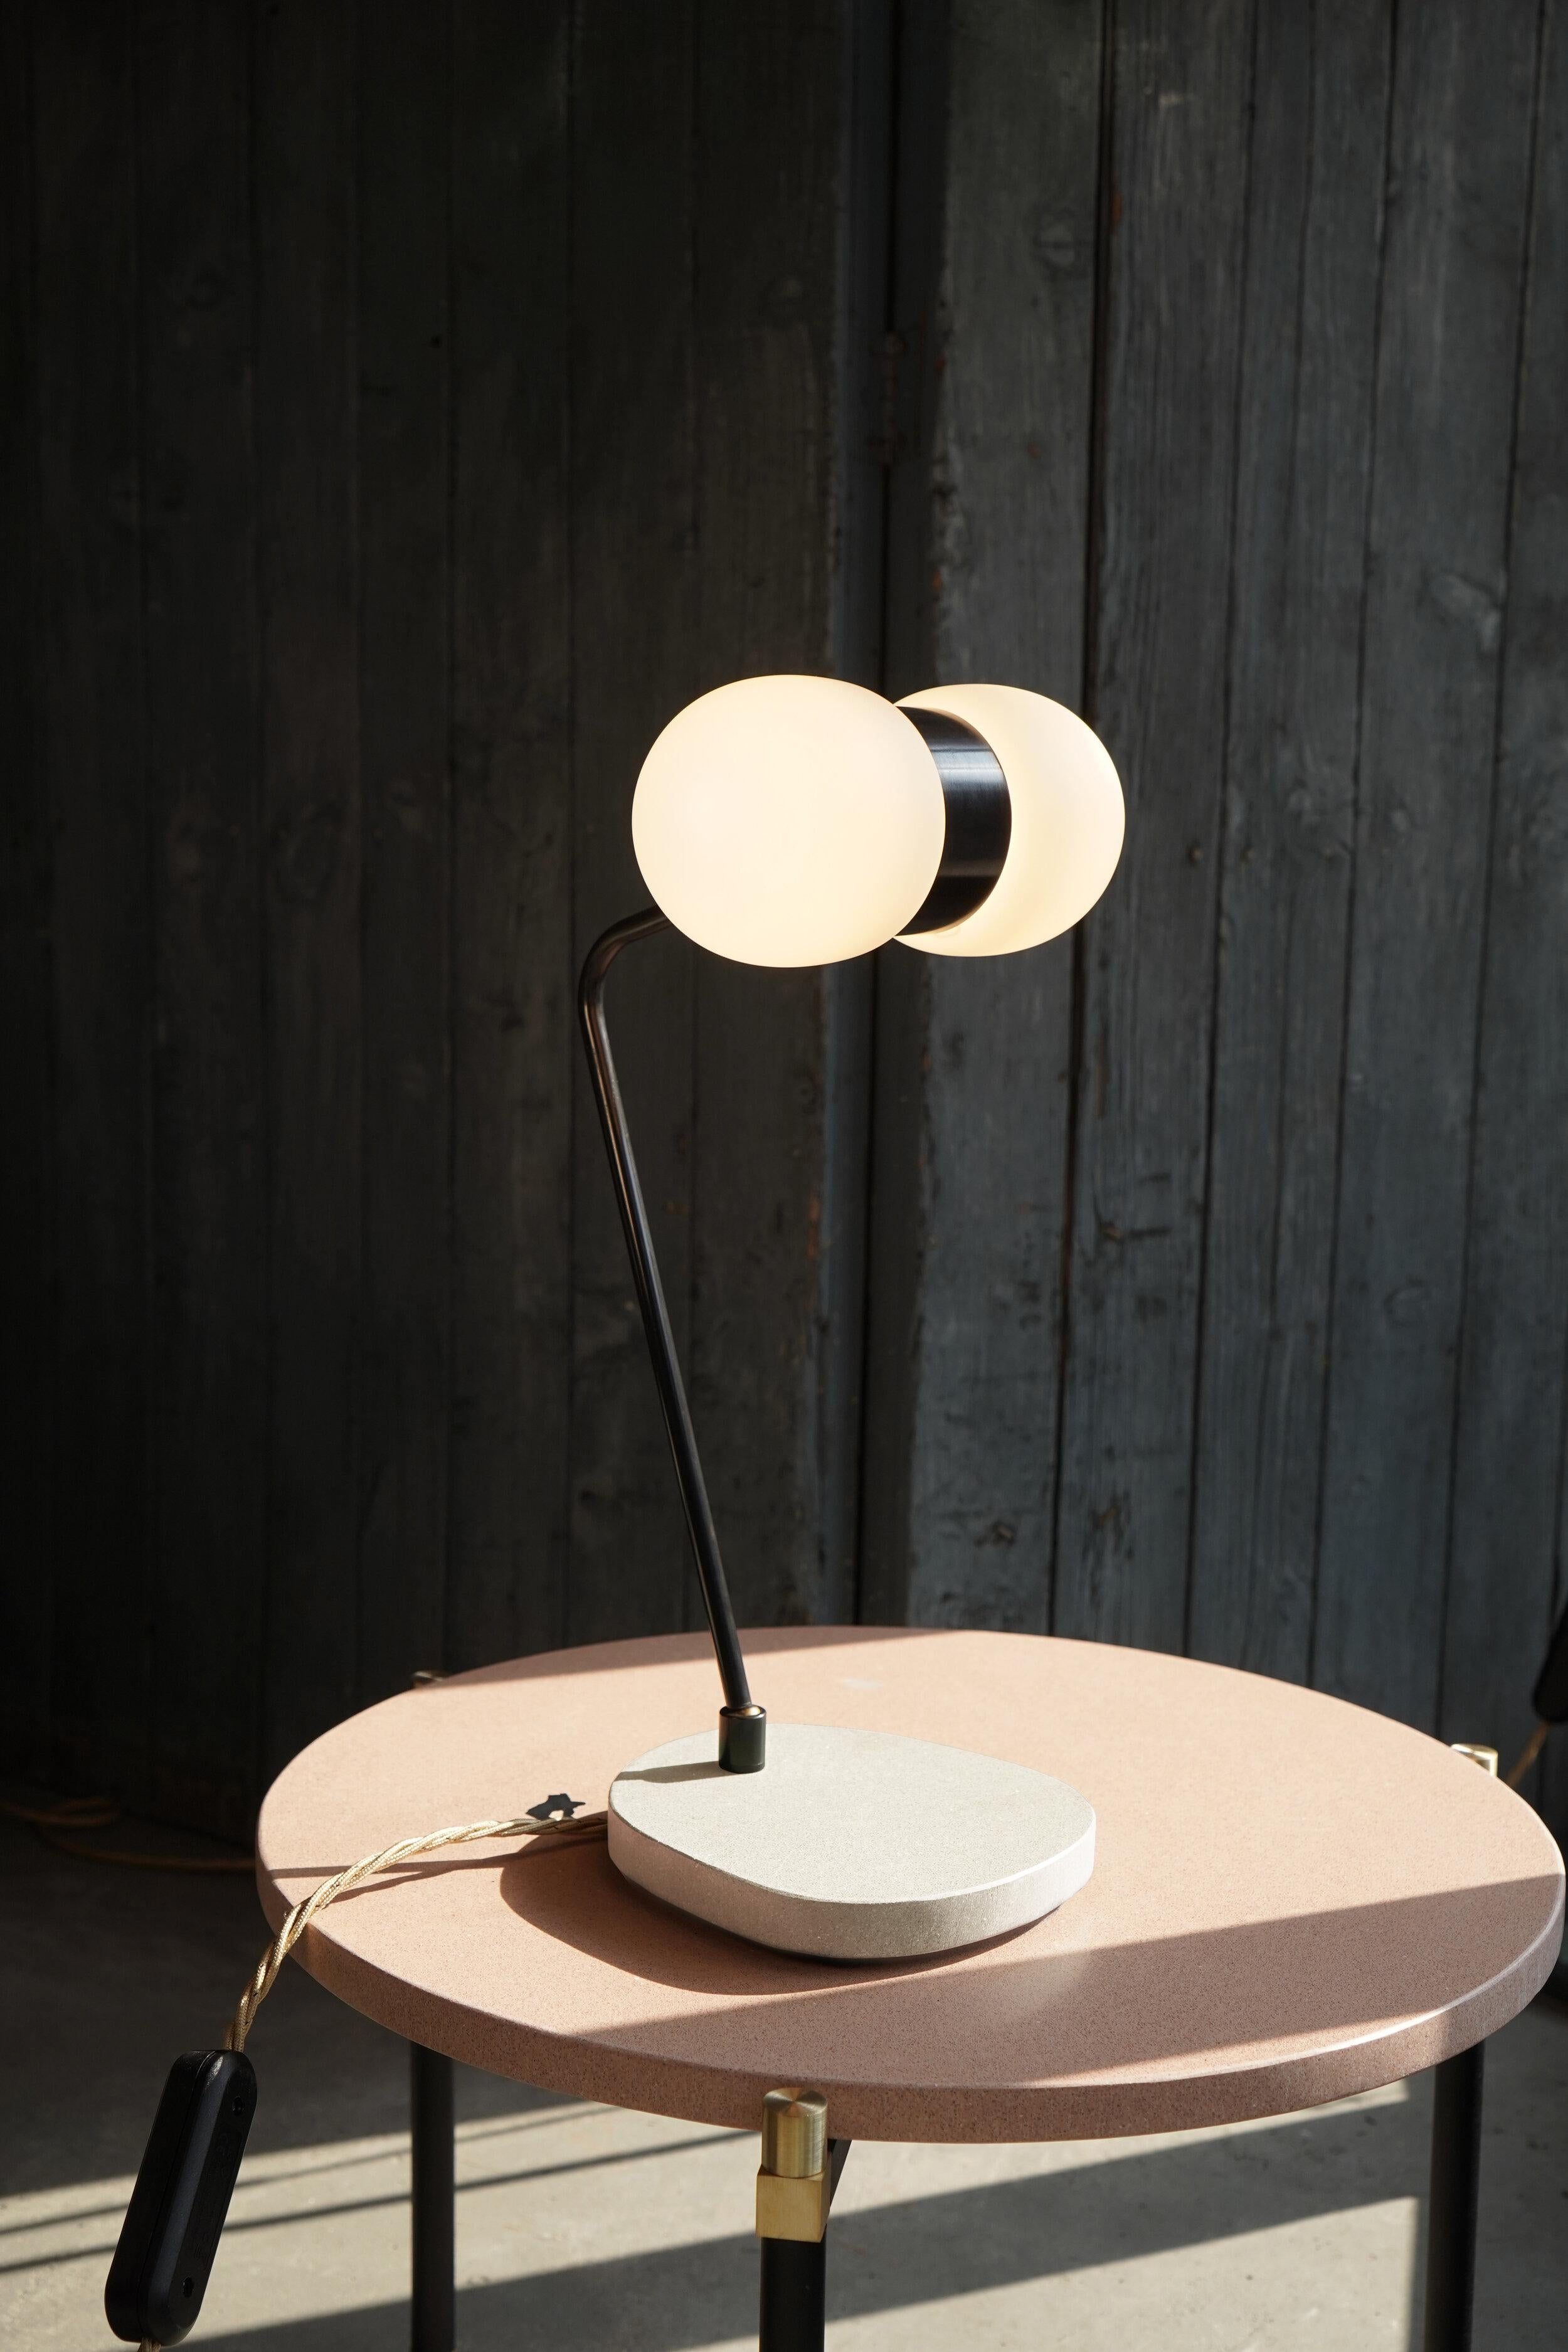 Nuvol Double table lamp by Contain
Dimensions: D 23 x W 39 x H 26 cm 
Materials: Brass structure and matte or glossy glass.
Available in different finishes.

All our lamps can be wired according to each country. If sold to the USA it will be